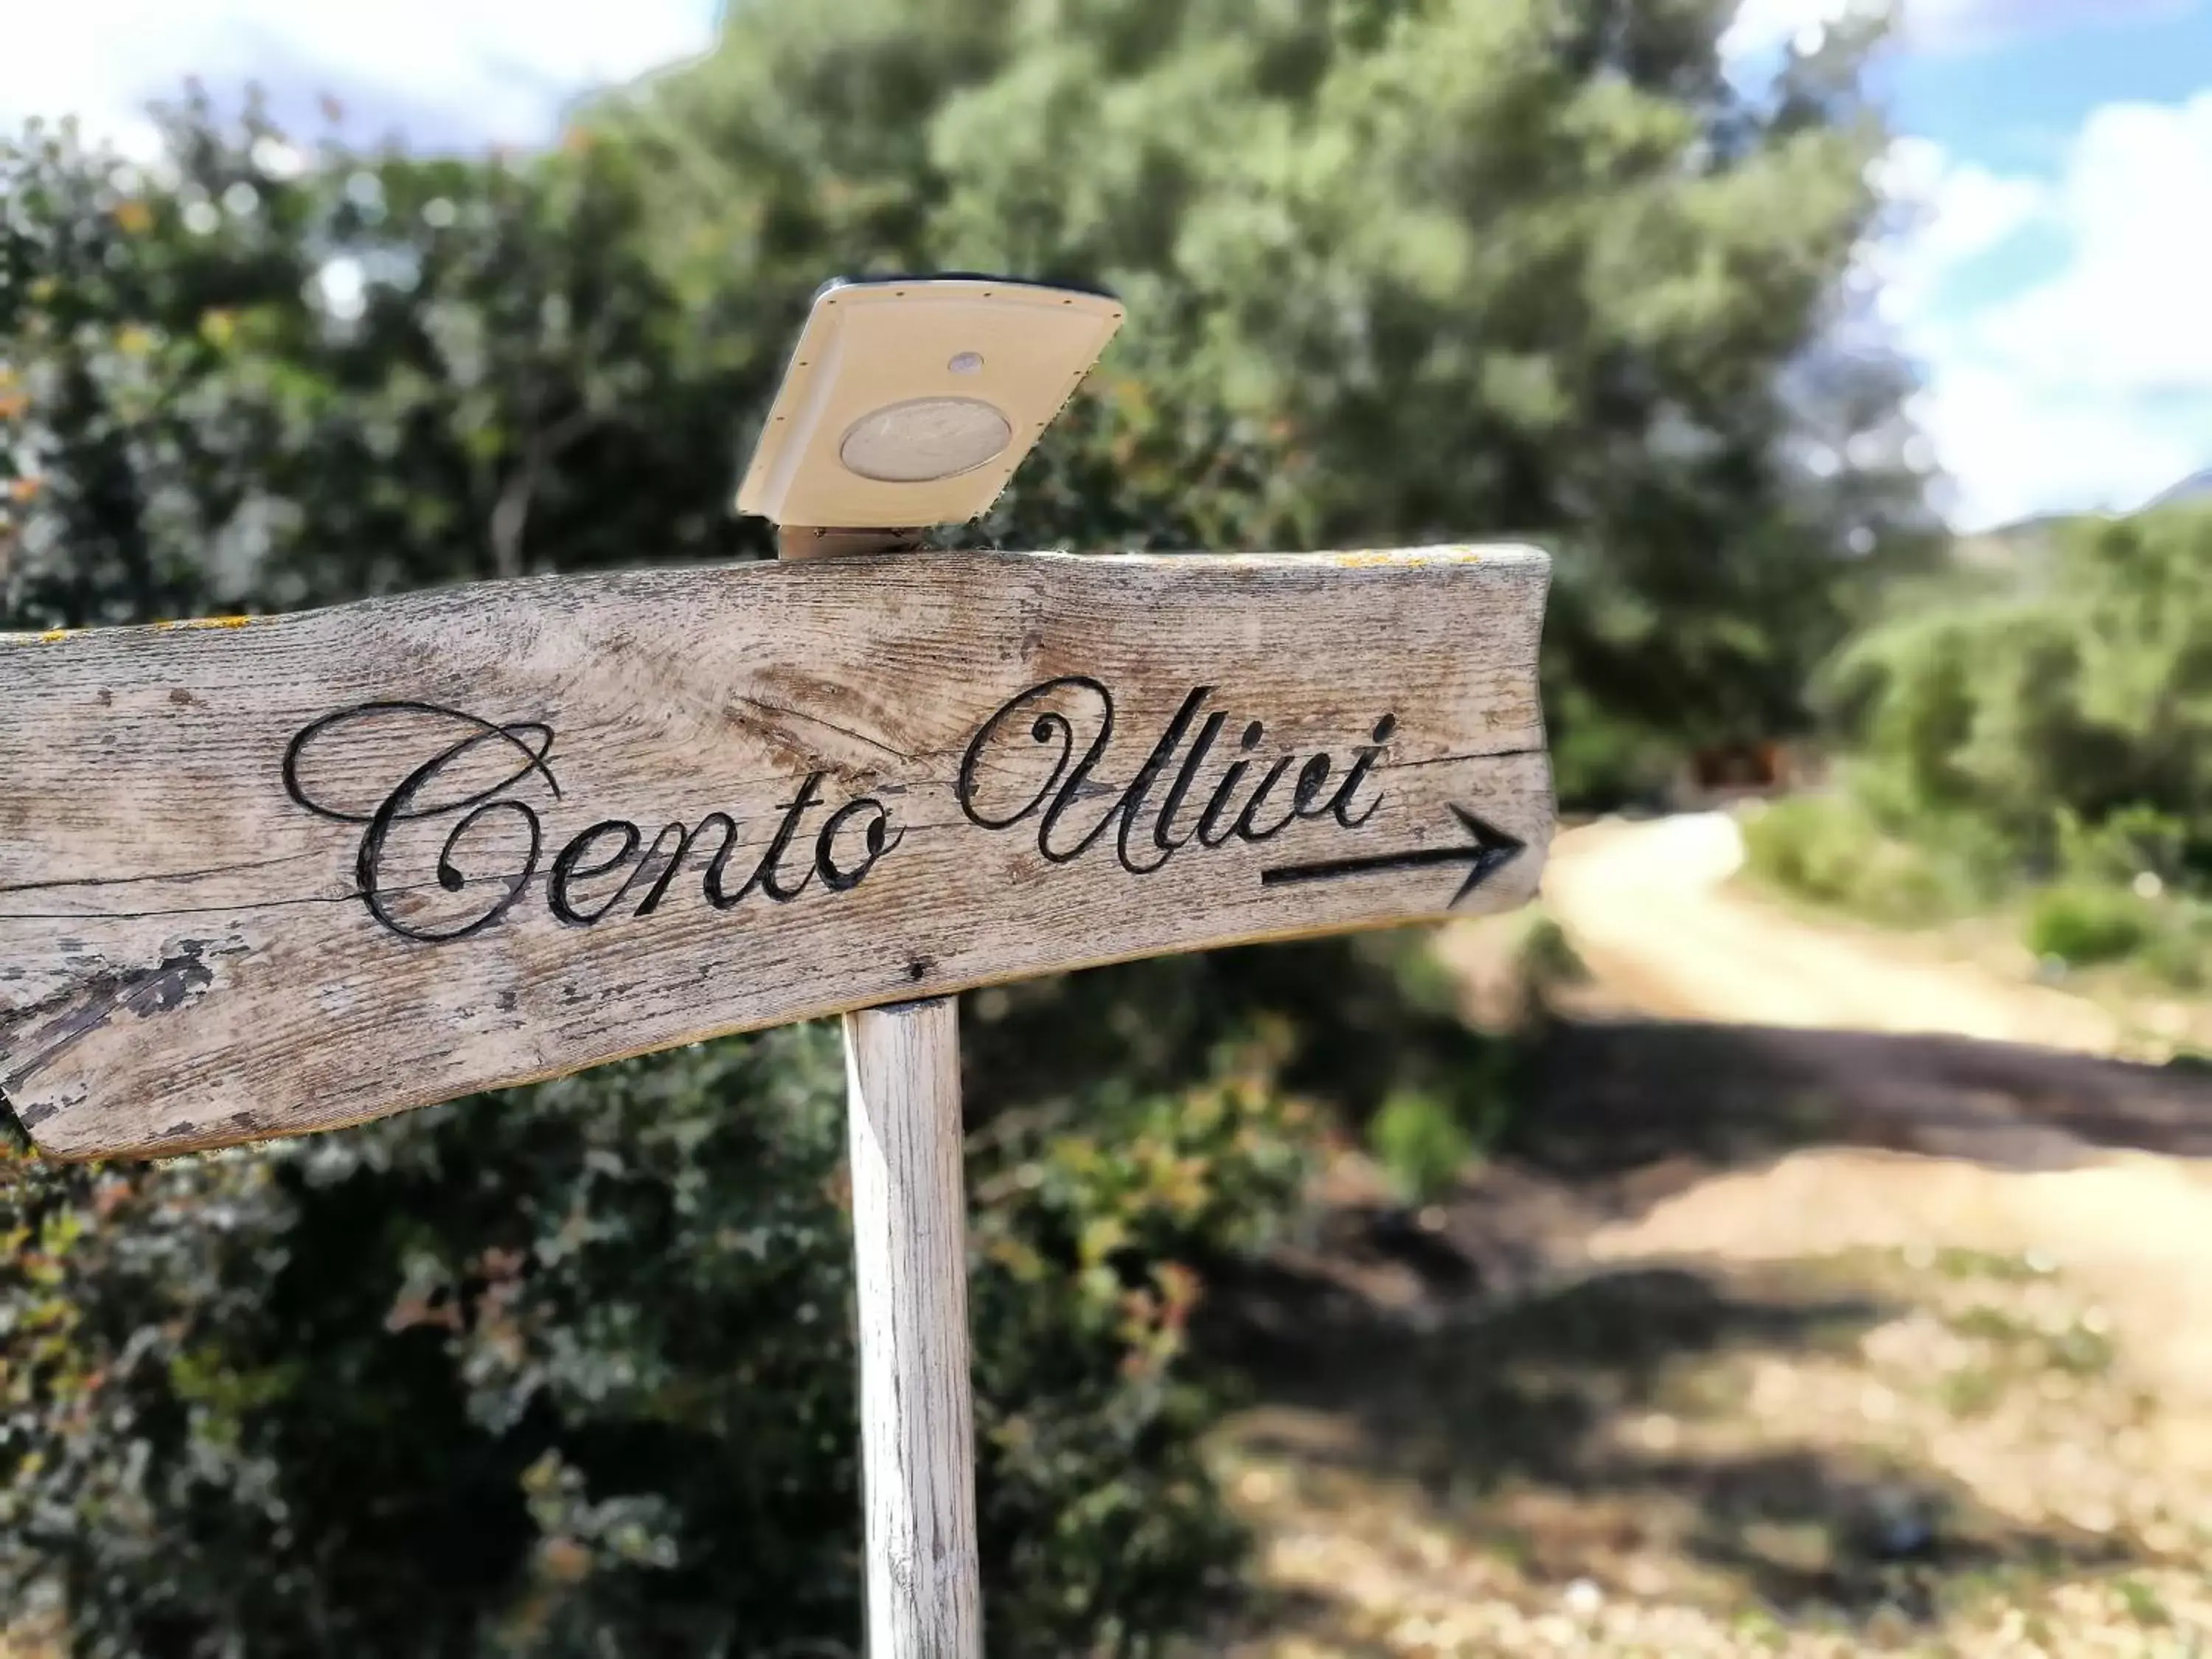 Property logo or sign in Cento Ulivi B&B